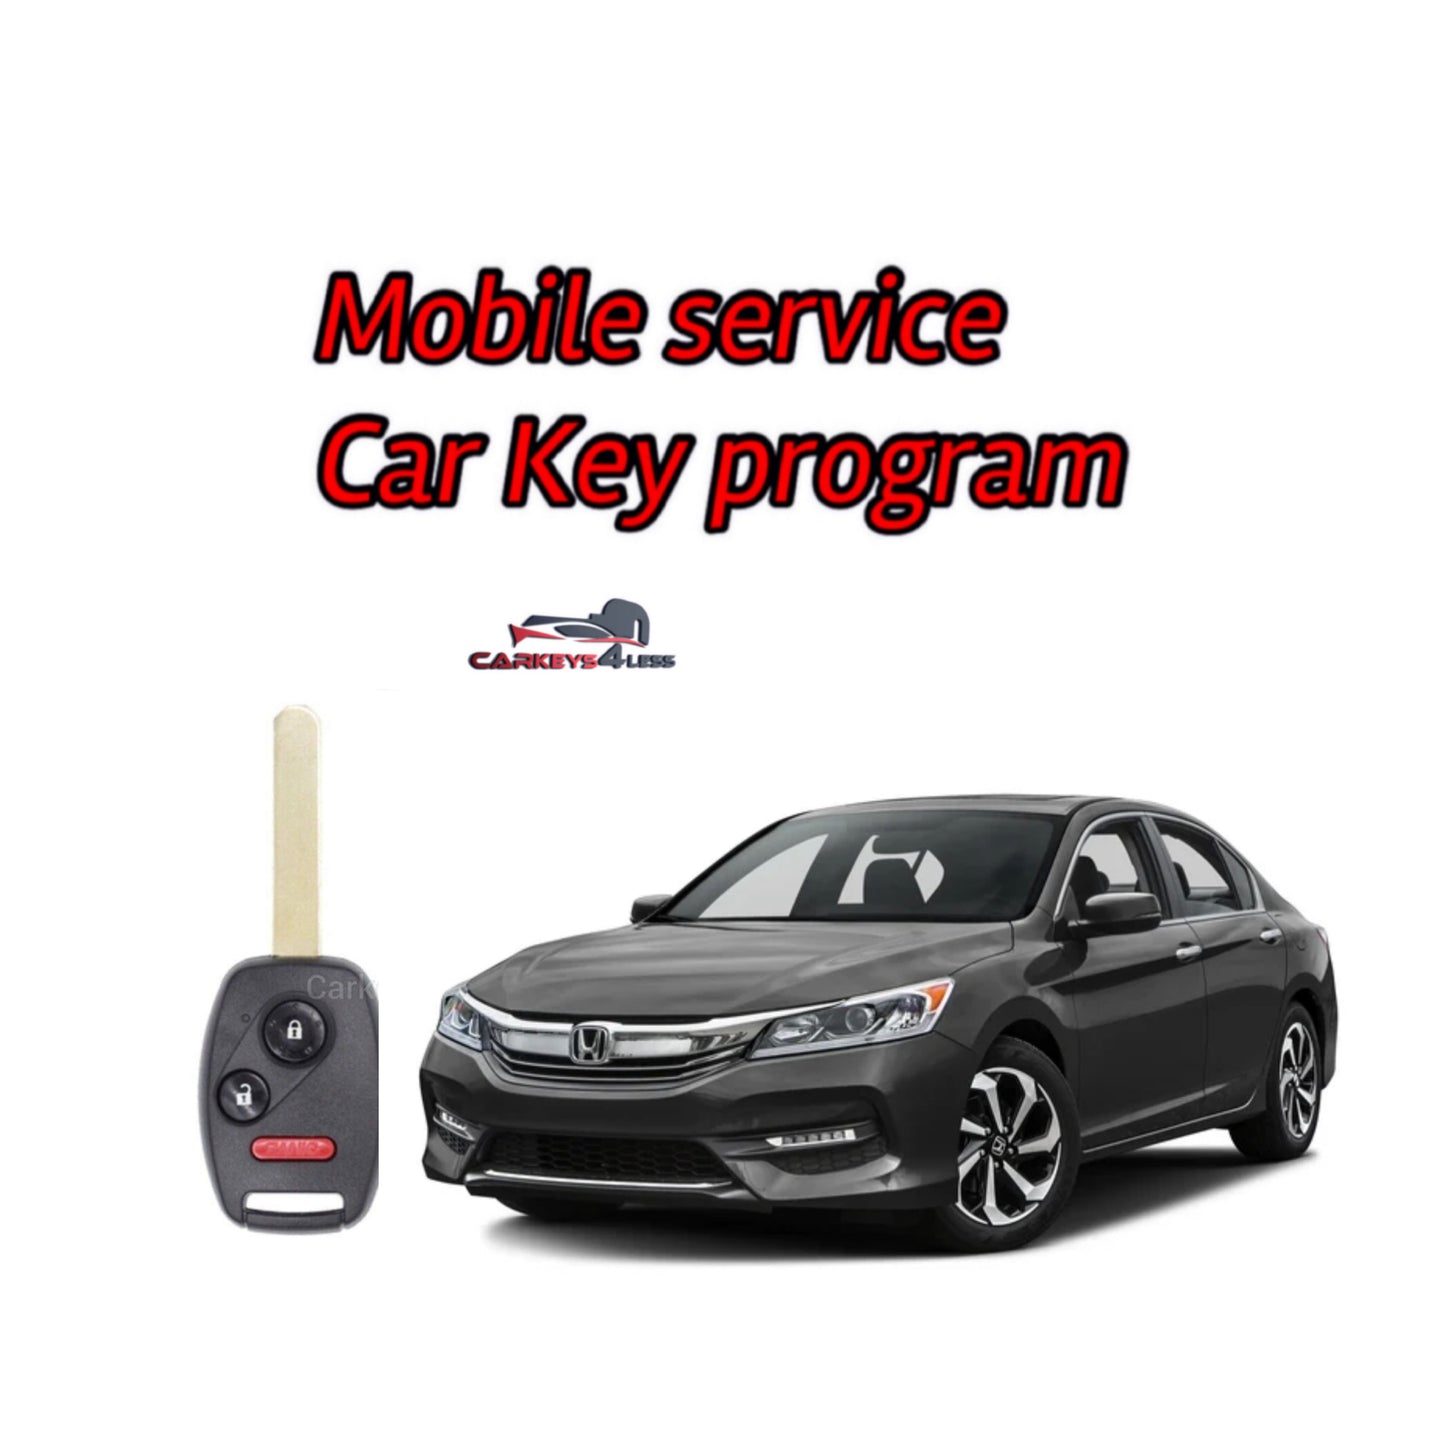 Mobile service for a honda car key replacement